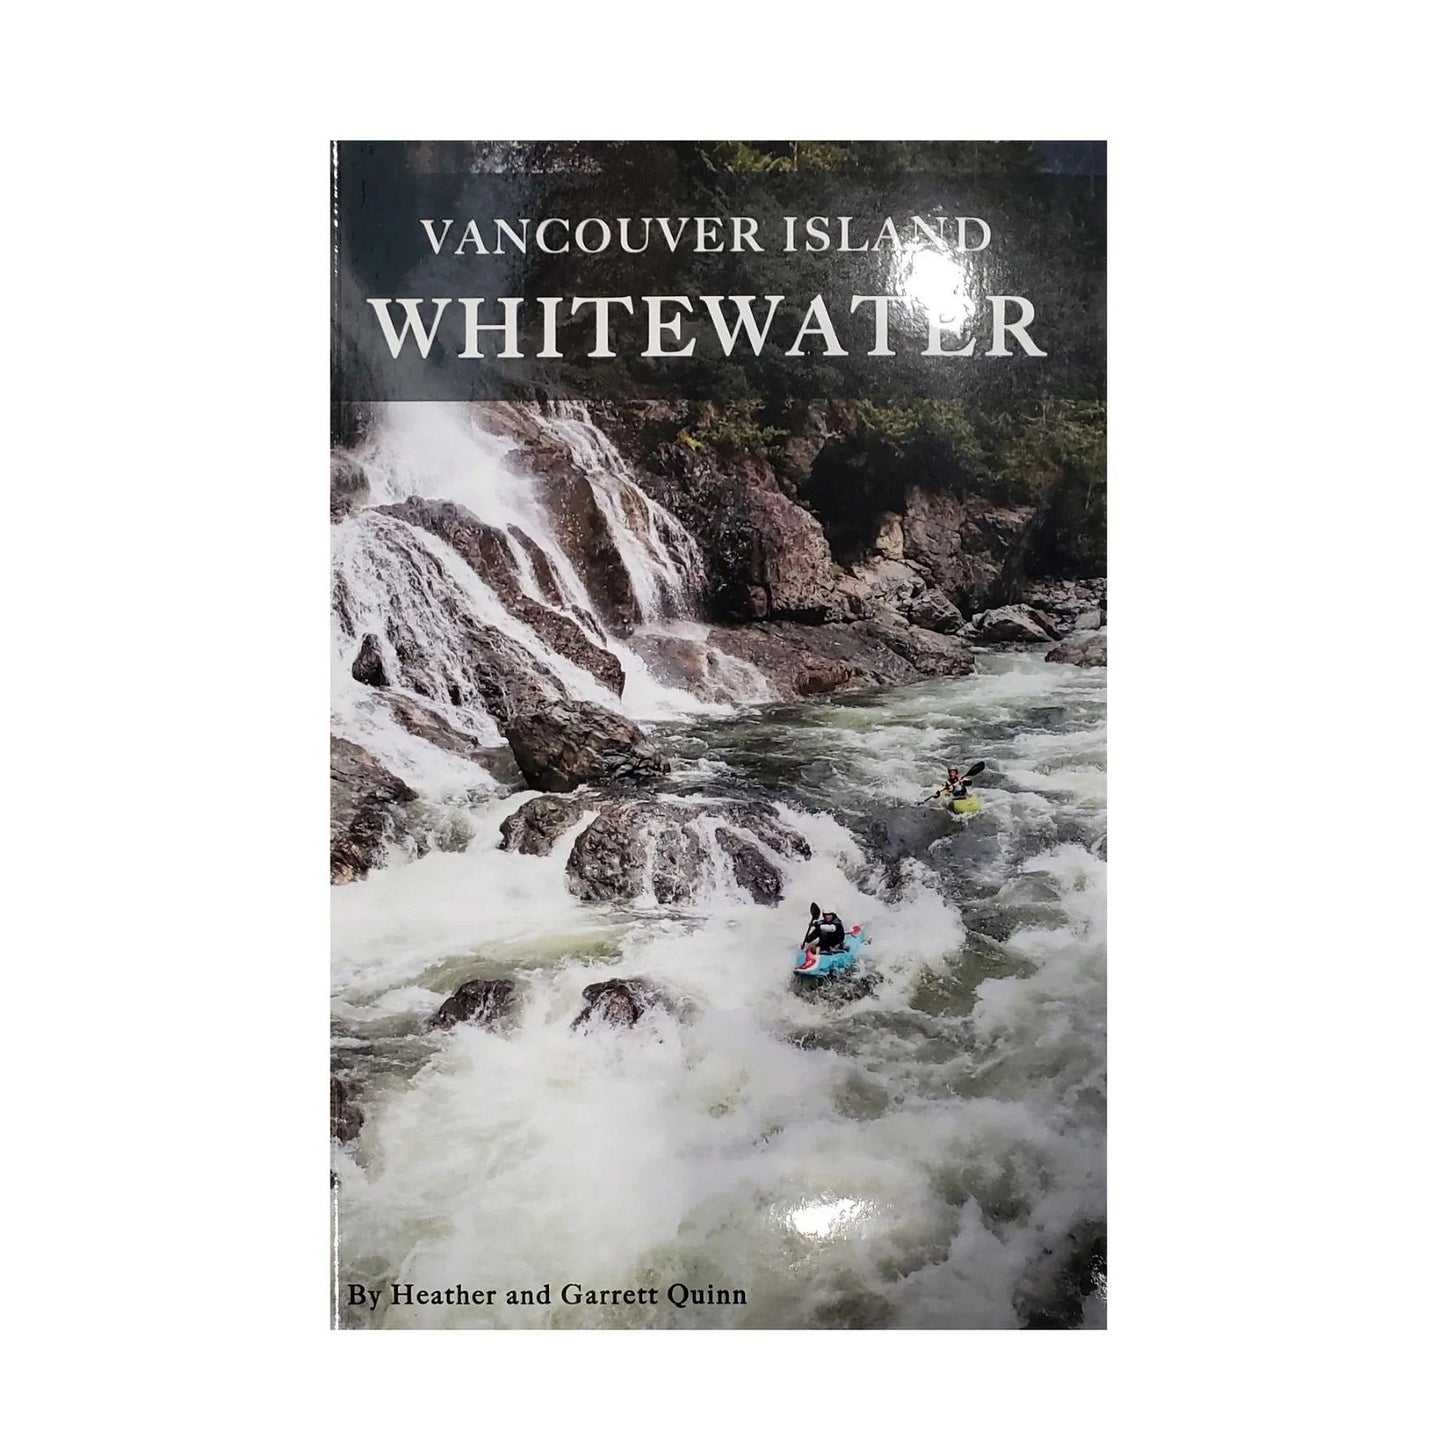 Heather and Garrett Quinn  Vancouver Island Whitewater - Book by Heather and Garrett Quinn  BestCoast Outfitters 